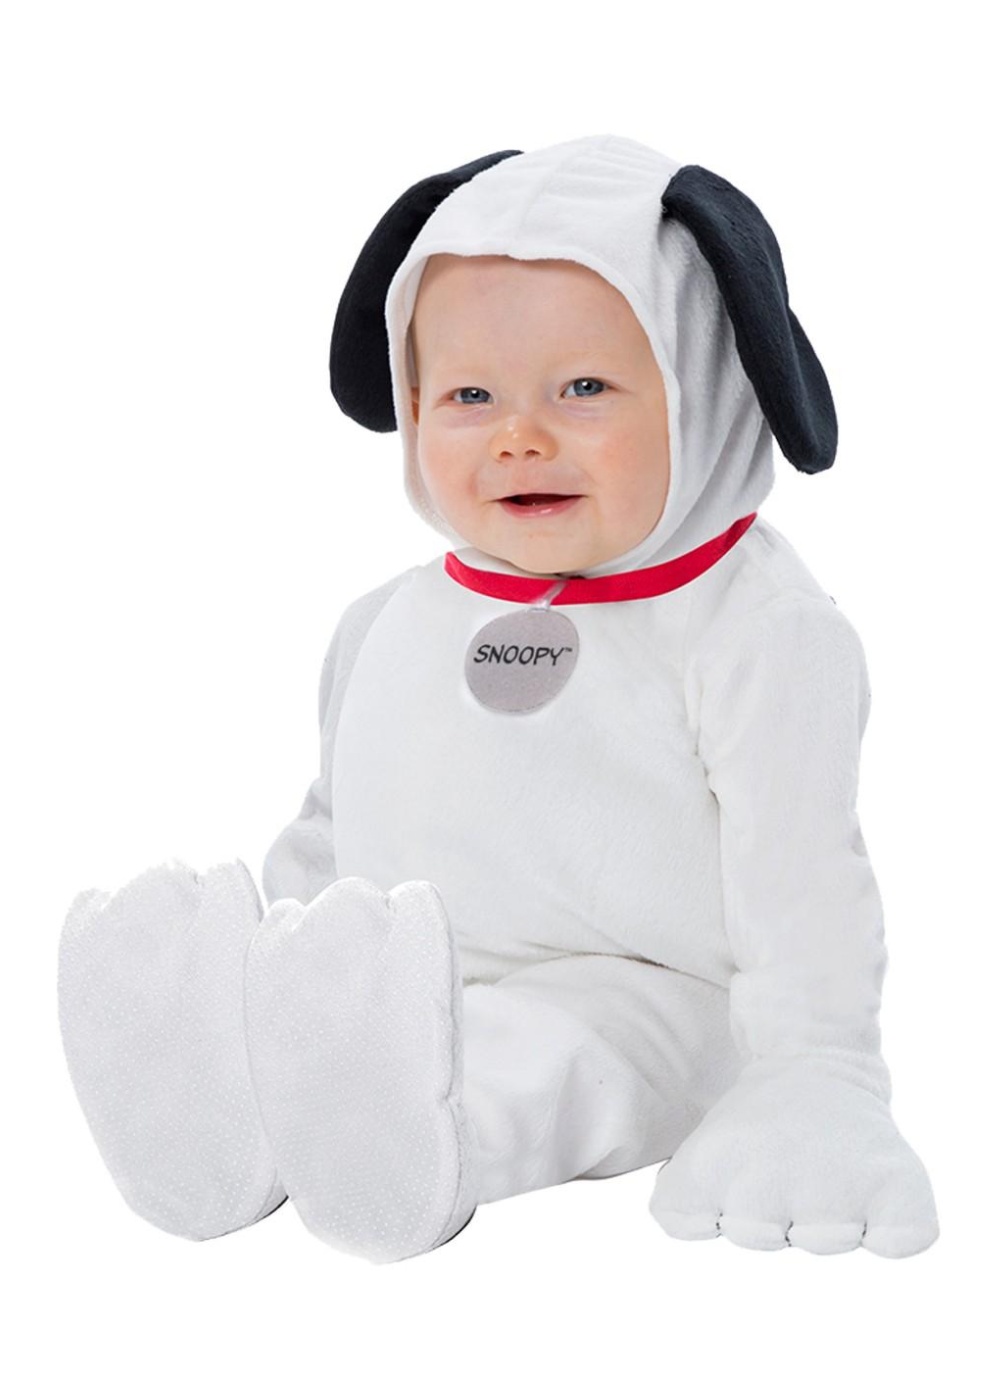 Peanuts Snoopy Baby Costume Deluxe